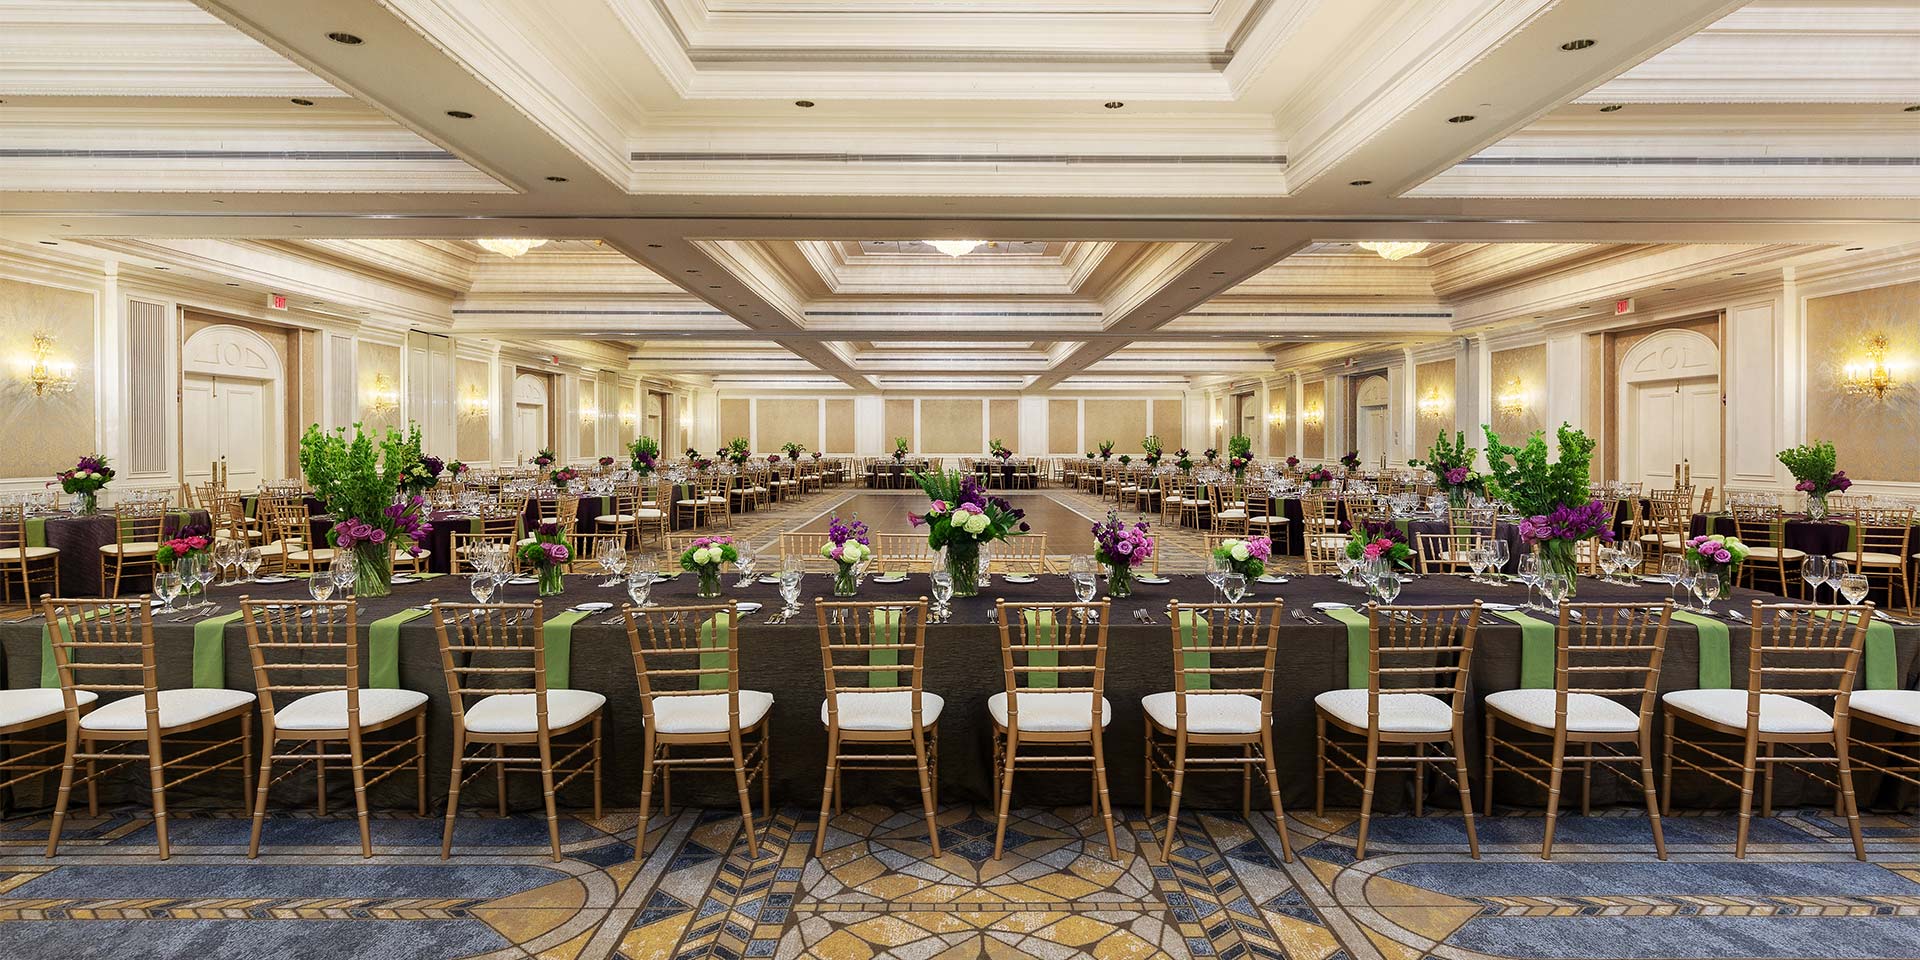 large square room with table and chairs surrounding the perimeter